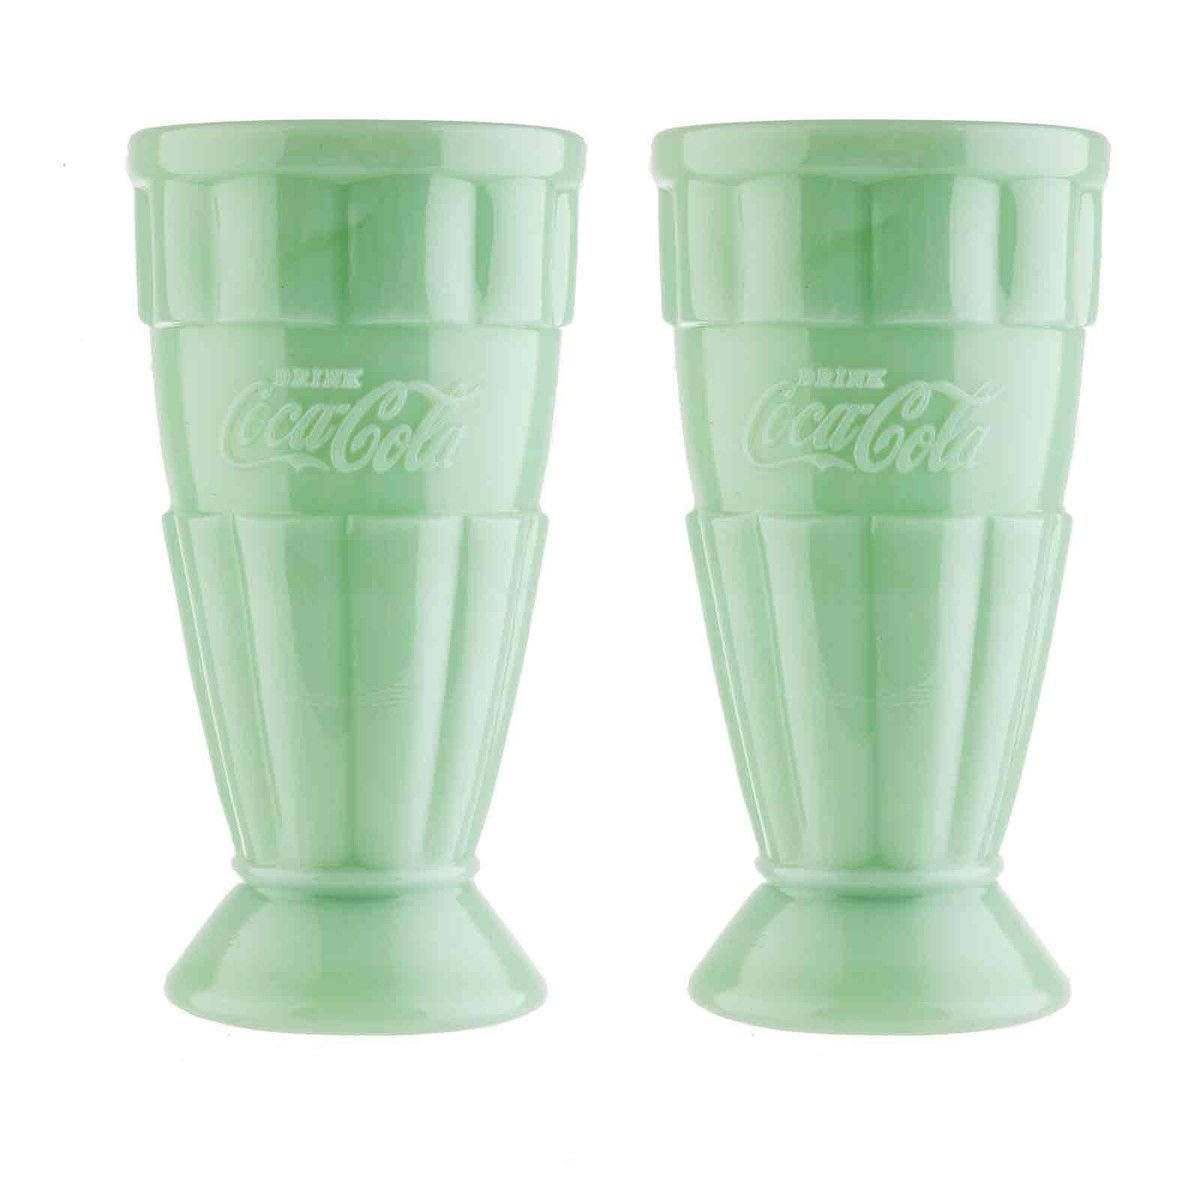 3 Coca-Cola Vintage Tint Drinking Glasses 16 oz. Made In U.S.A. Green Blue  Clear